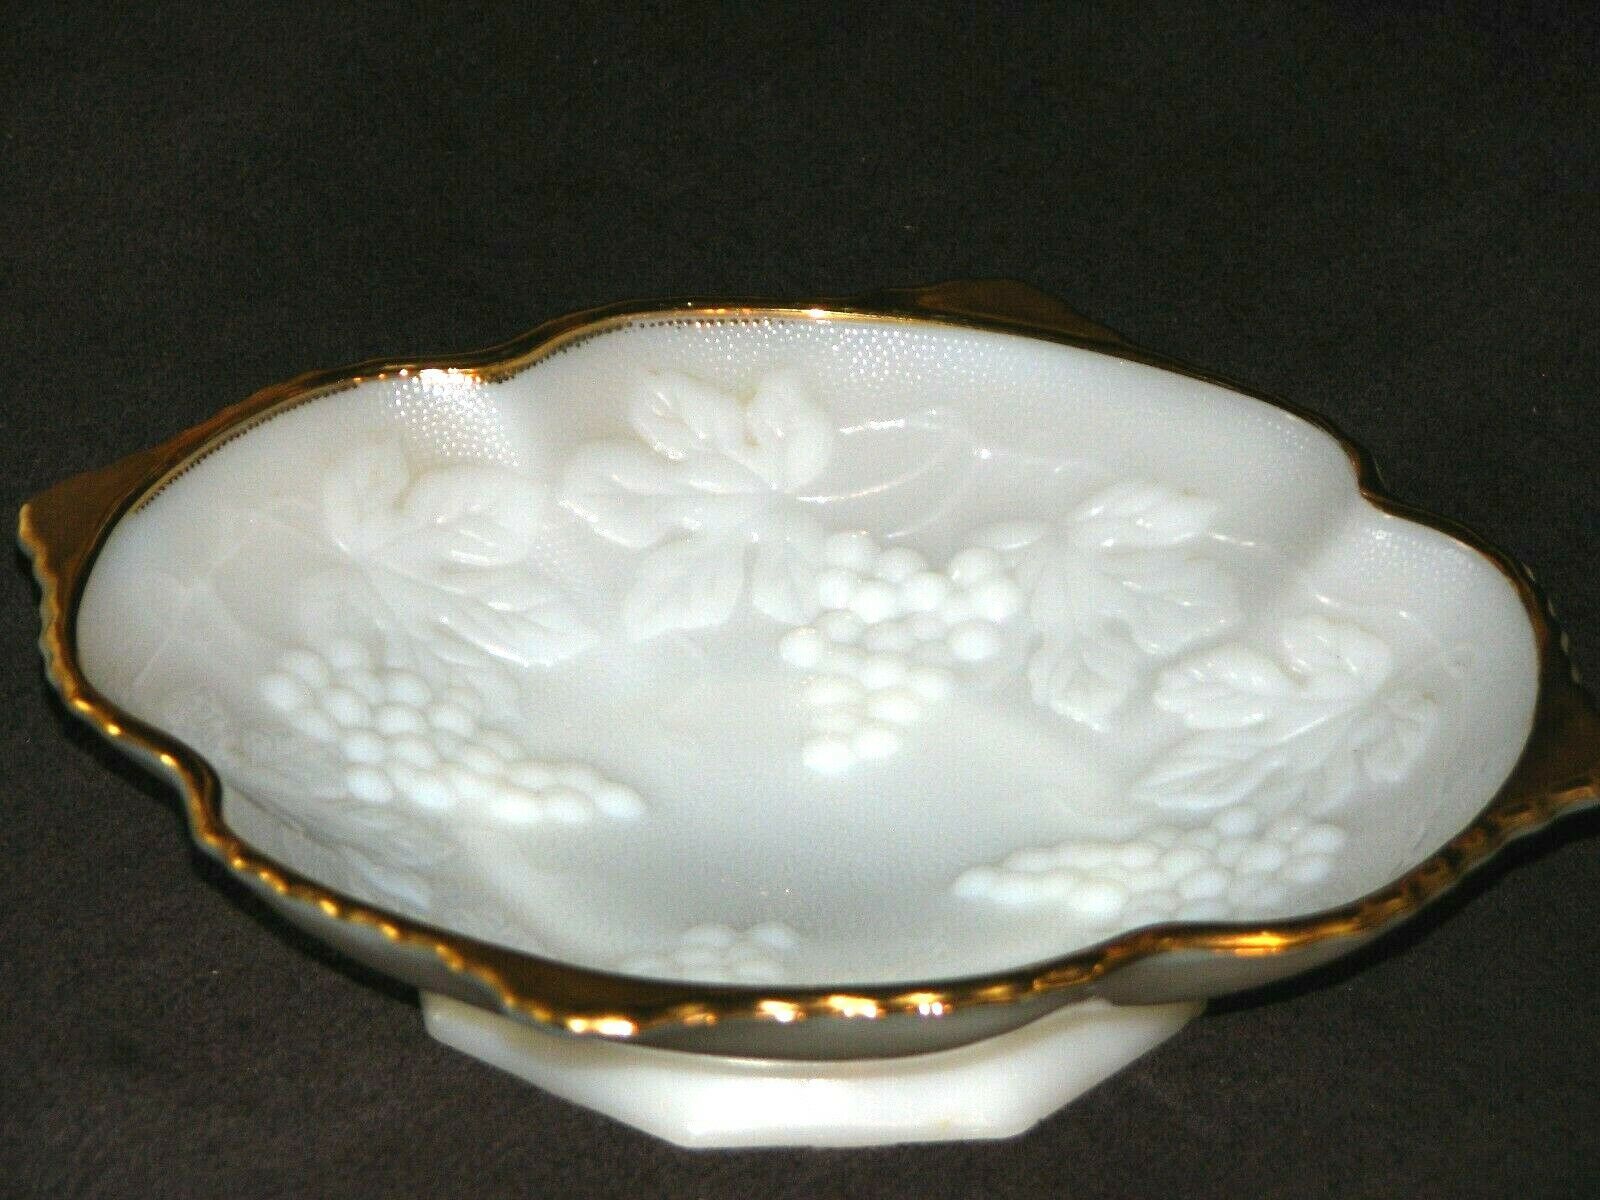 Primary image for Vintage Anchor Hocking Milk Glass Grape Pattern Footed Candy Dish Gold Trim